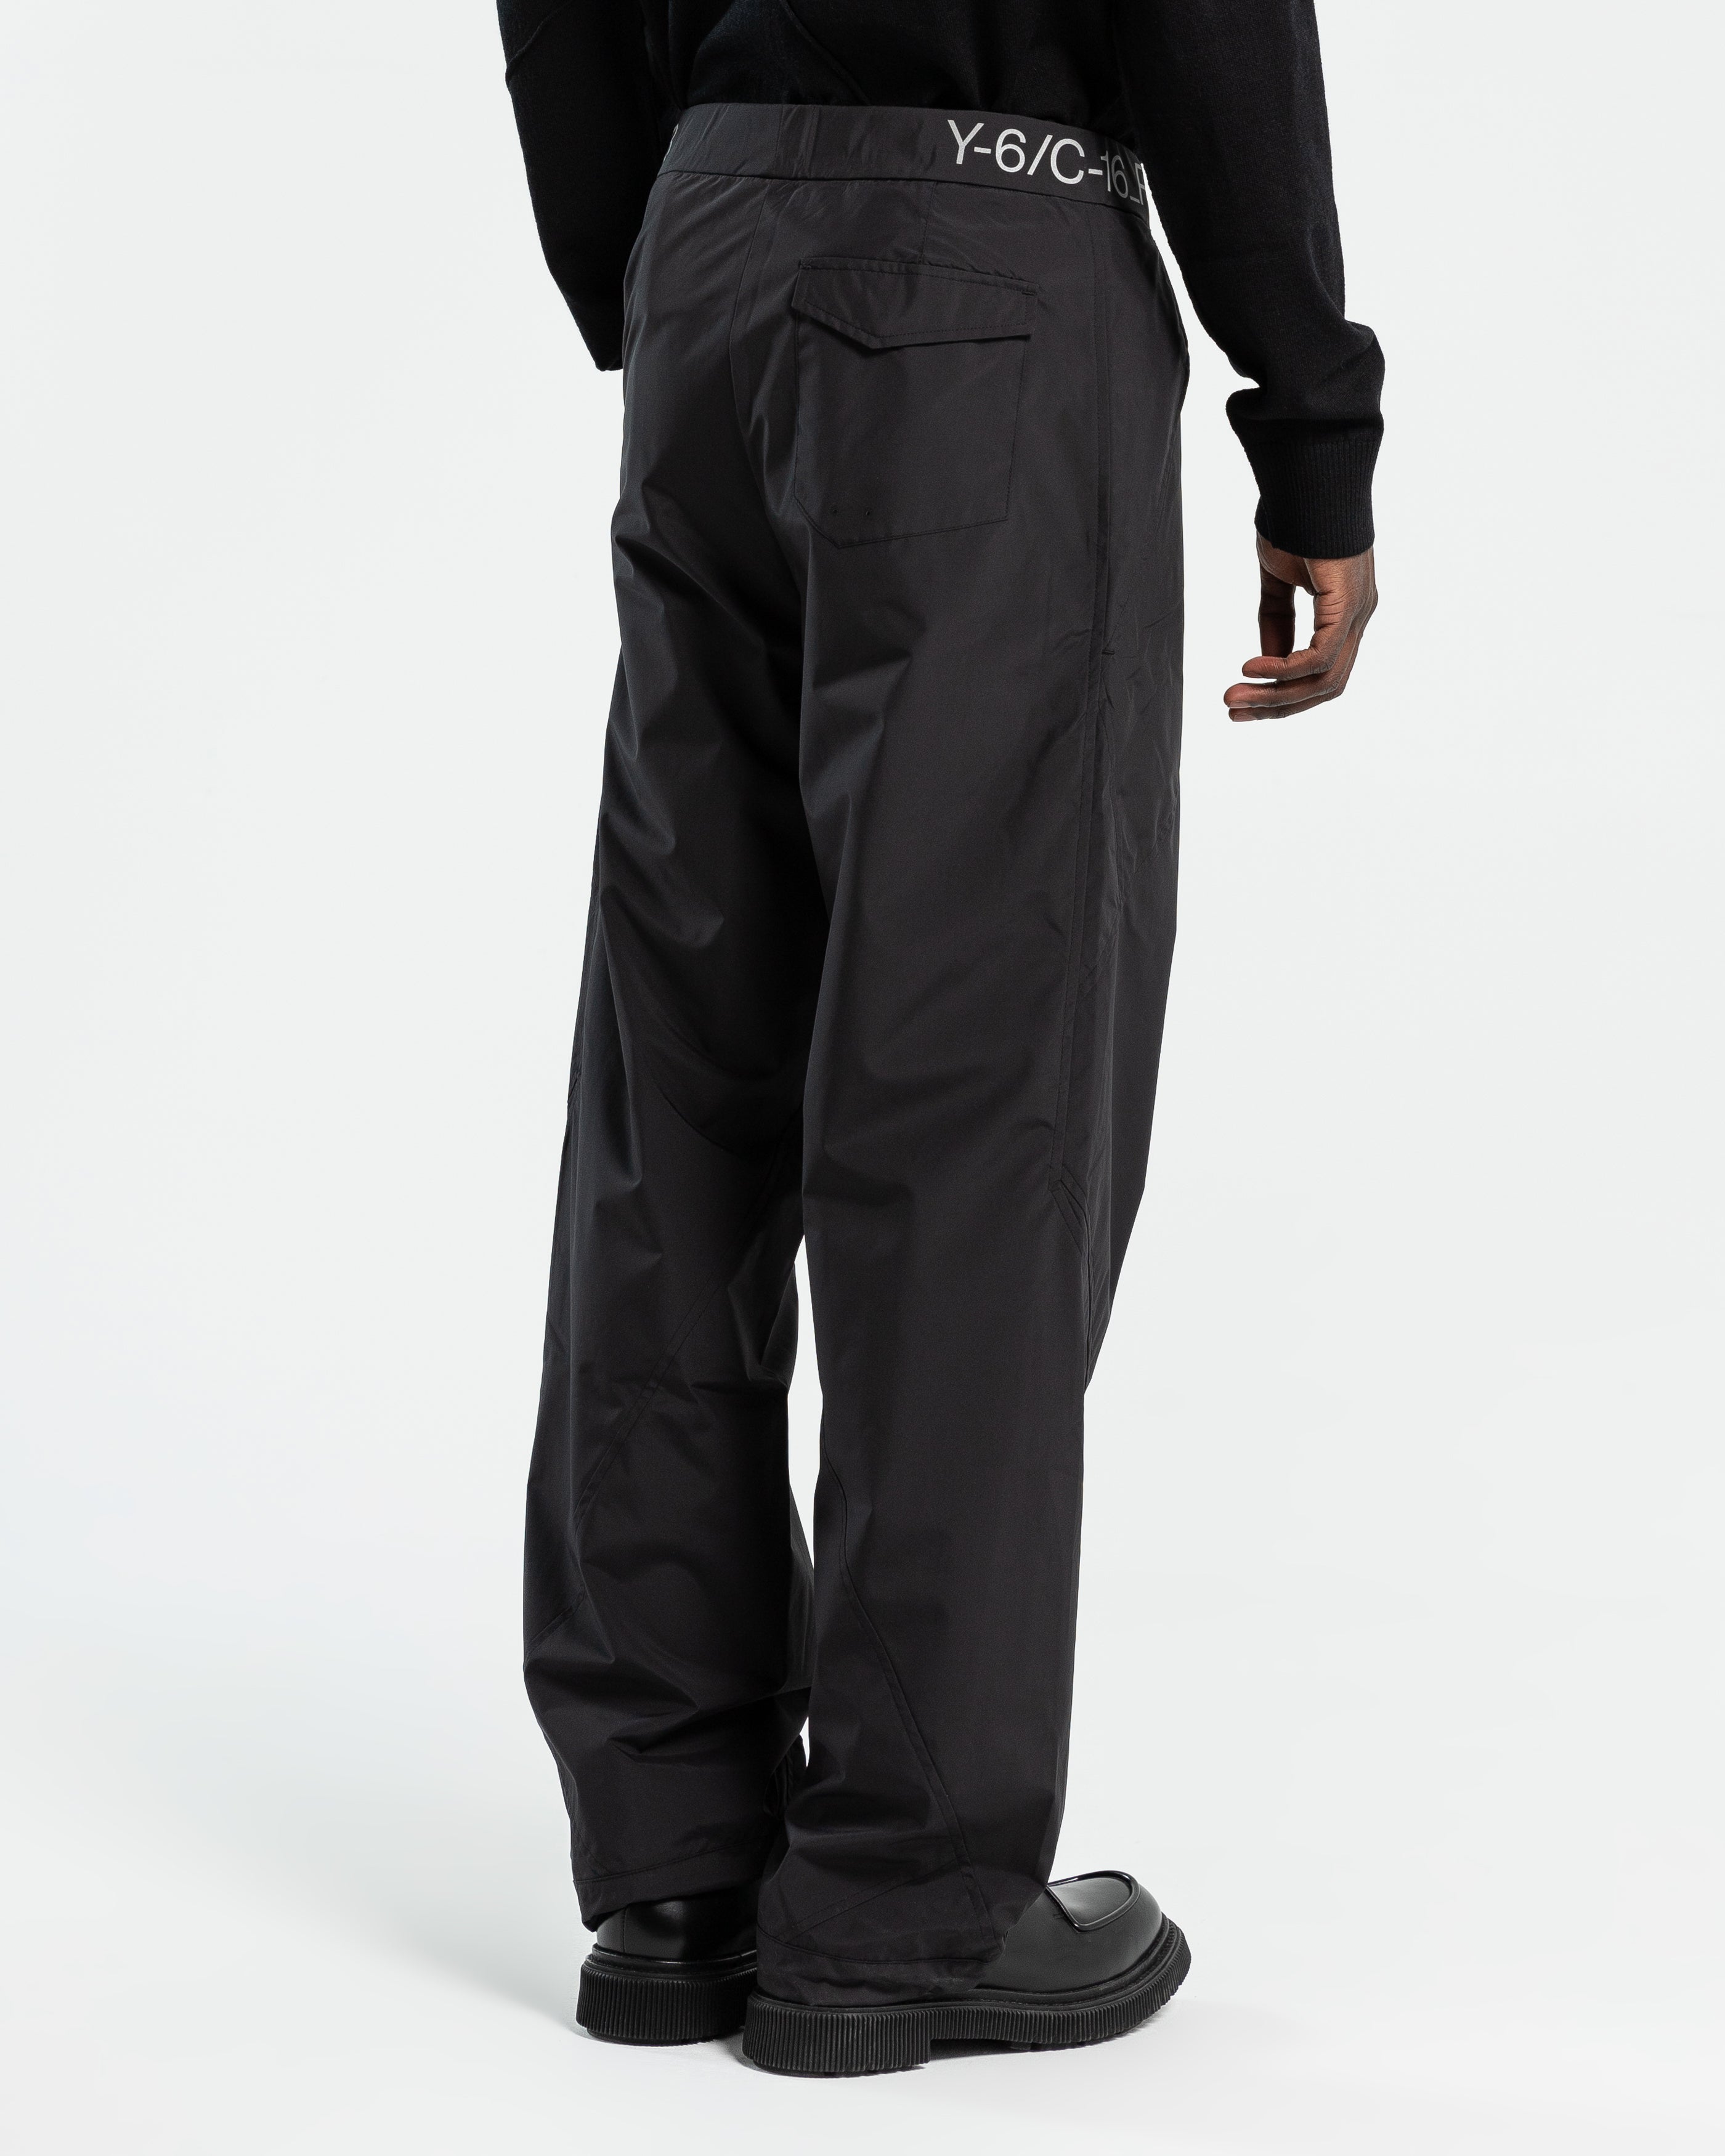 Nephin Storm Pants in Black